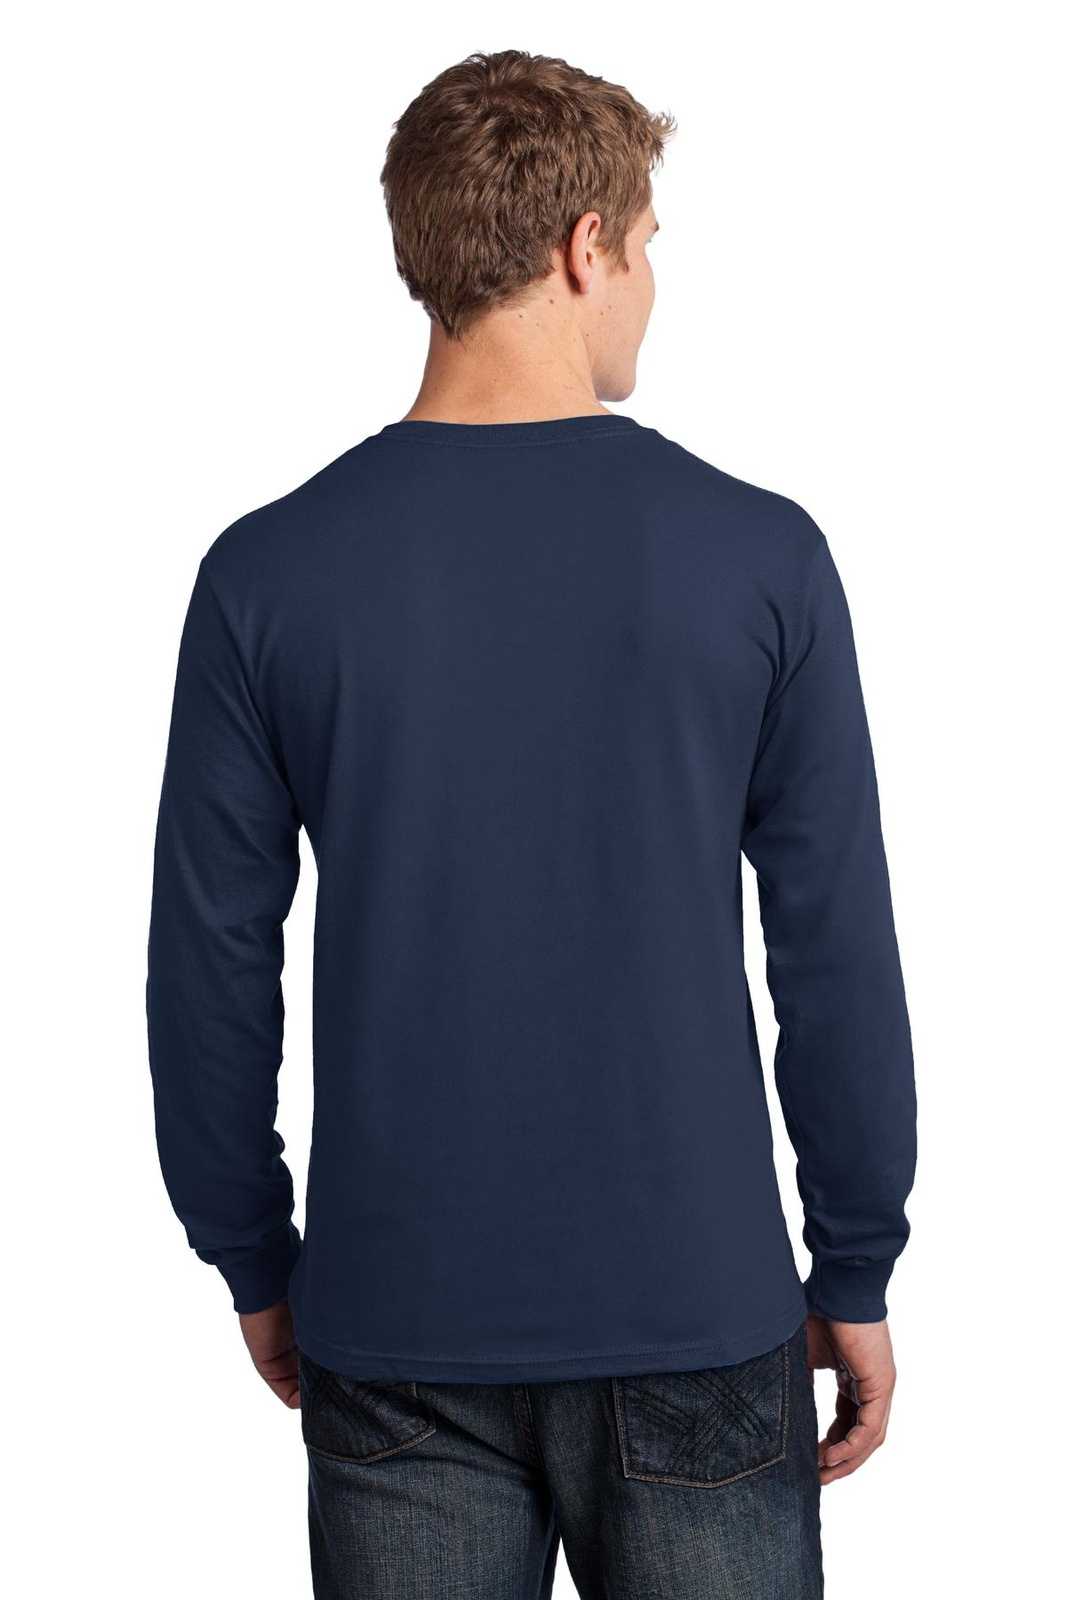 Port & Company PC54LS Long Sleeve Core Cotton Tee - Navy - HIT a Double - 1